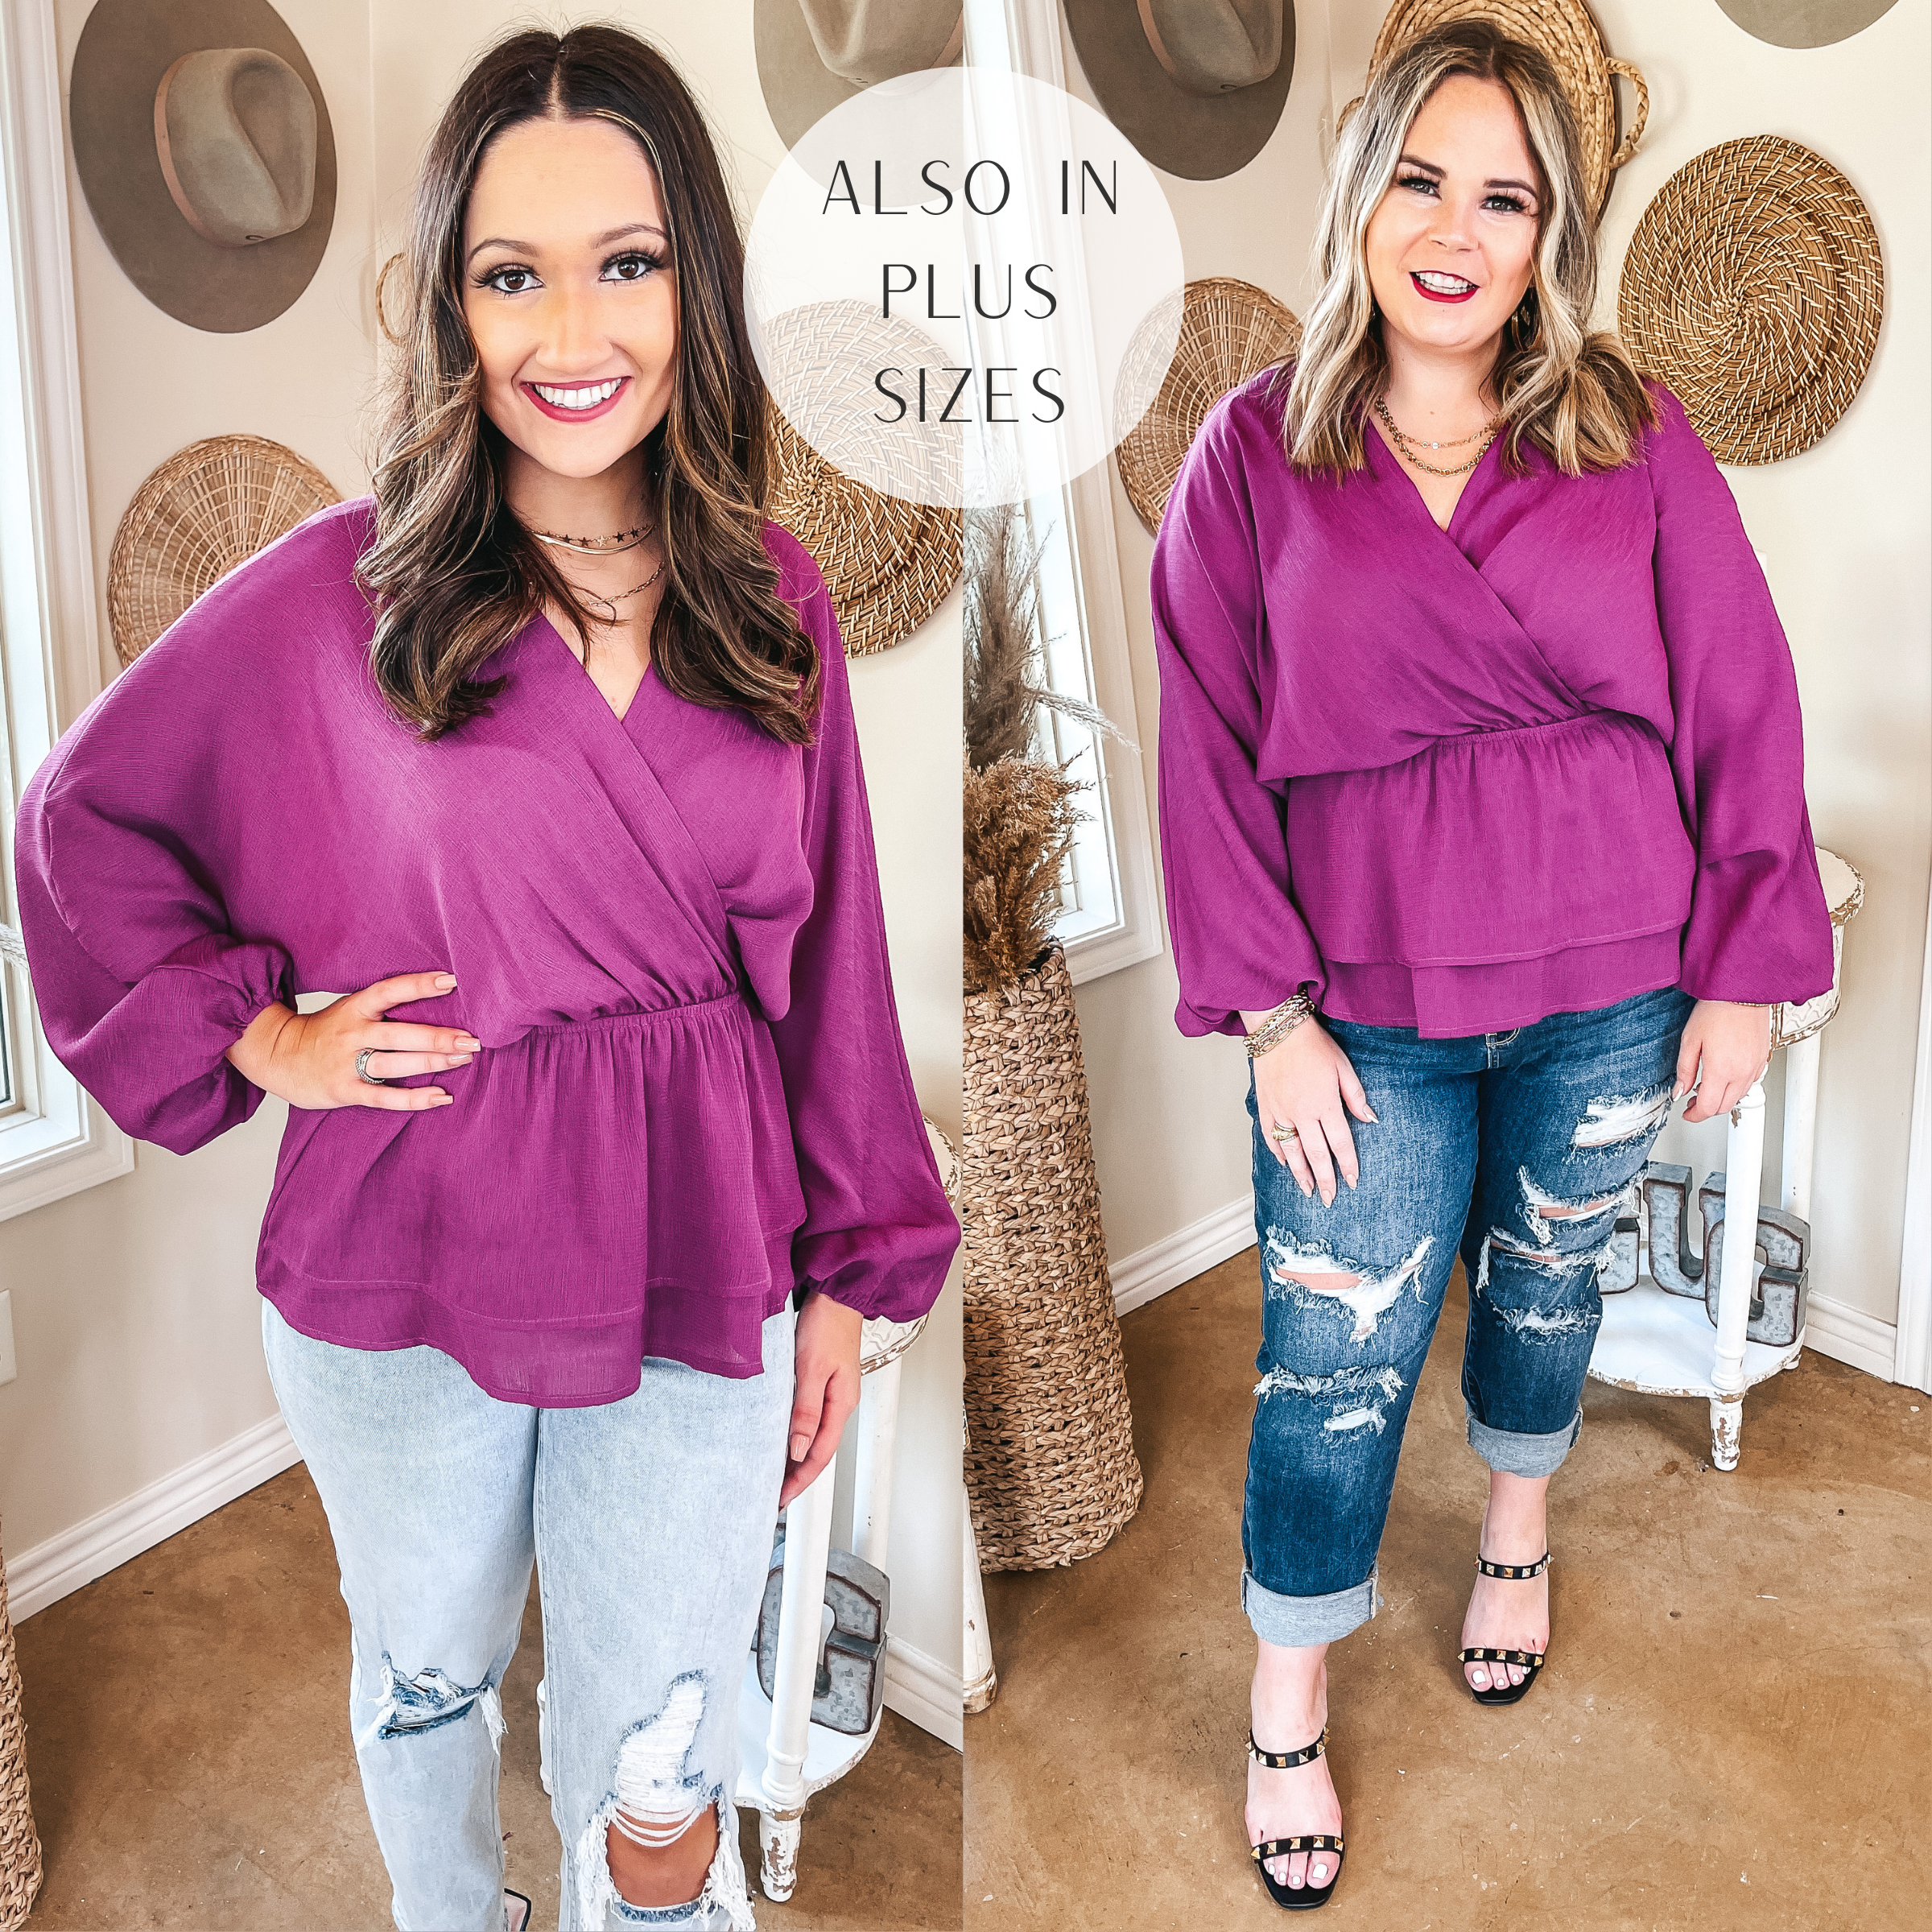 Two models are both wearing a magenta wrap long sleeve top. The model on the left is also wearing light wash ripped jeans and layered necklaces. The plus size model on the right is wearing the magenta blouse with medium wash ripped jeans, layered necklaces, and black studded strappy heels. 